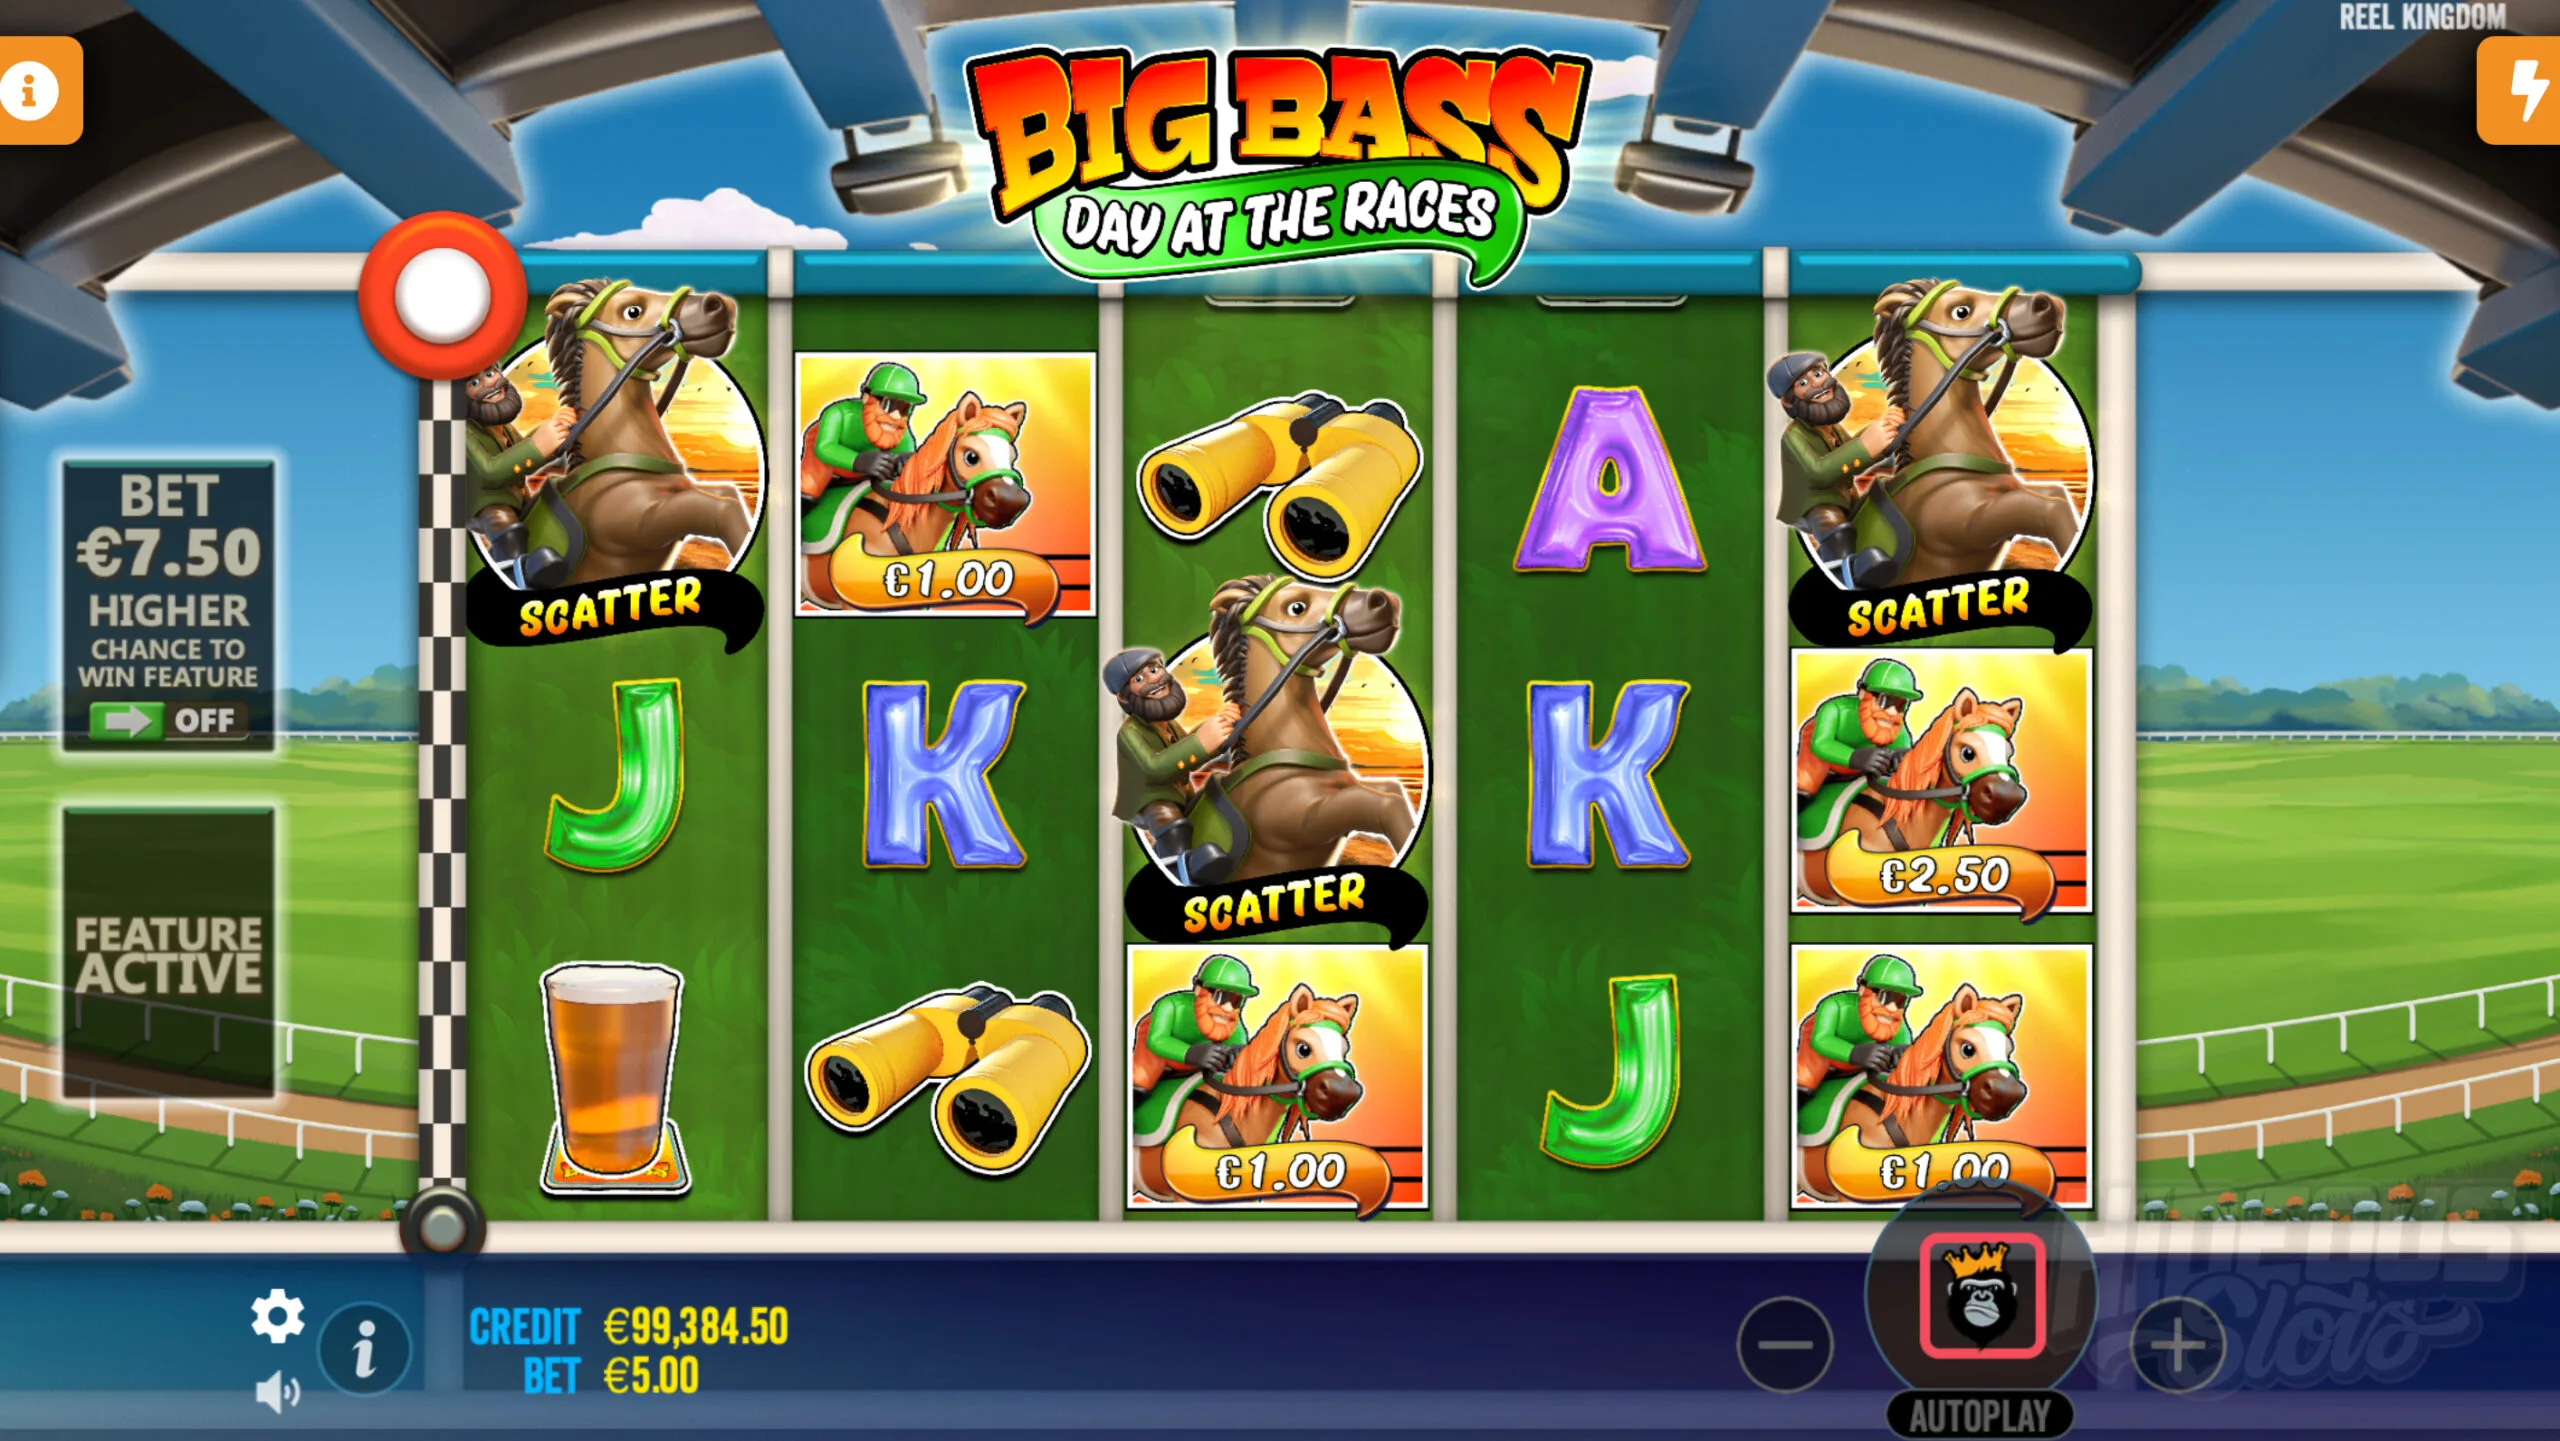 Land 3 or More Scatters to Trigger Free Spins